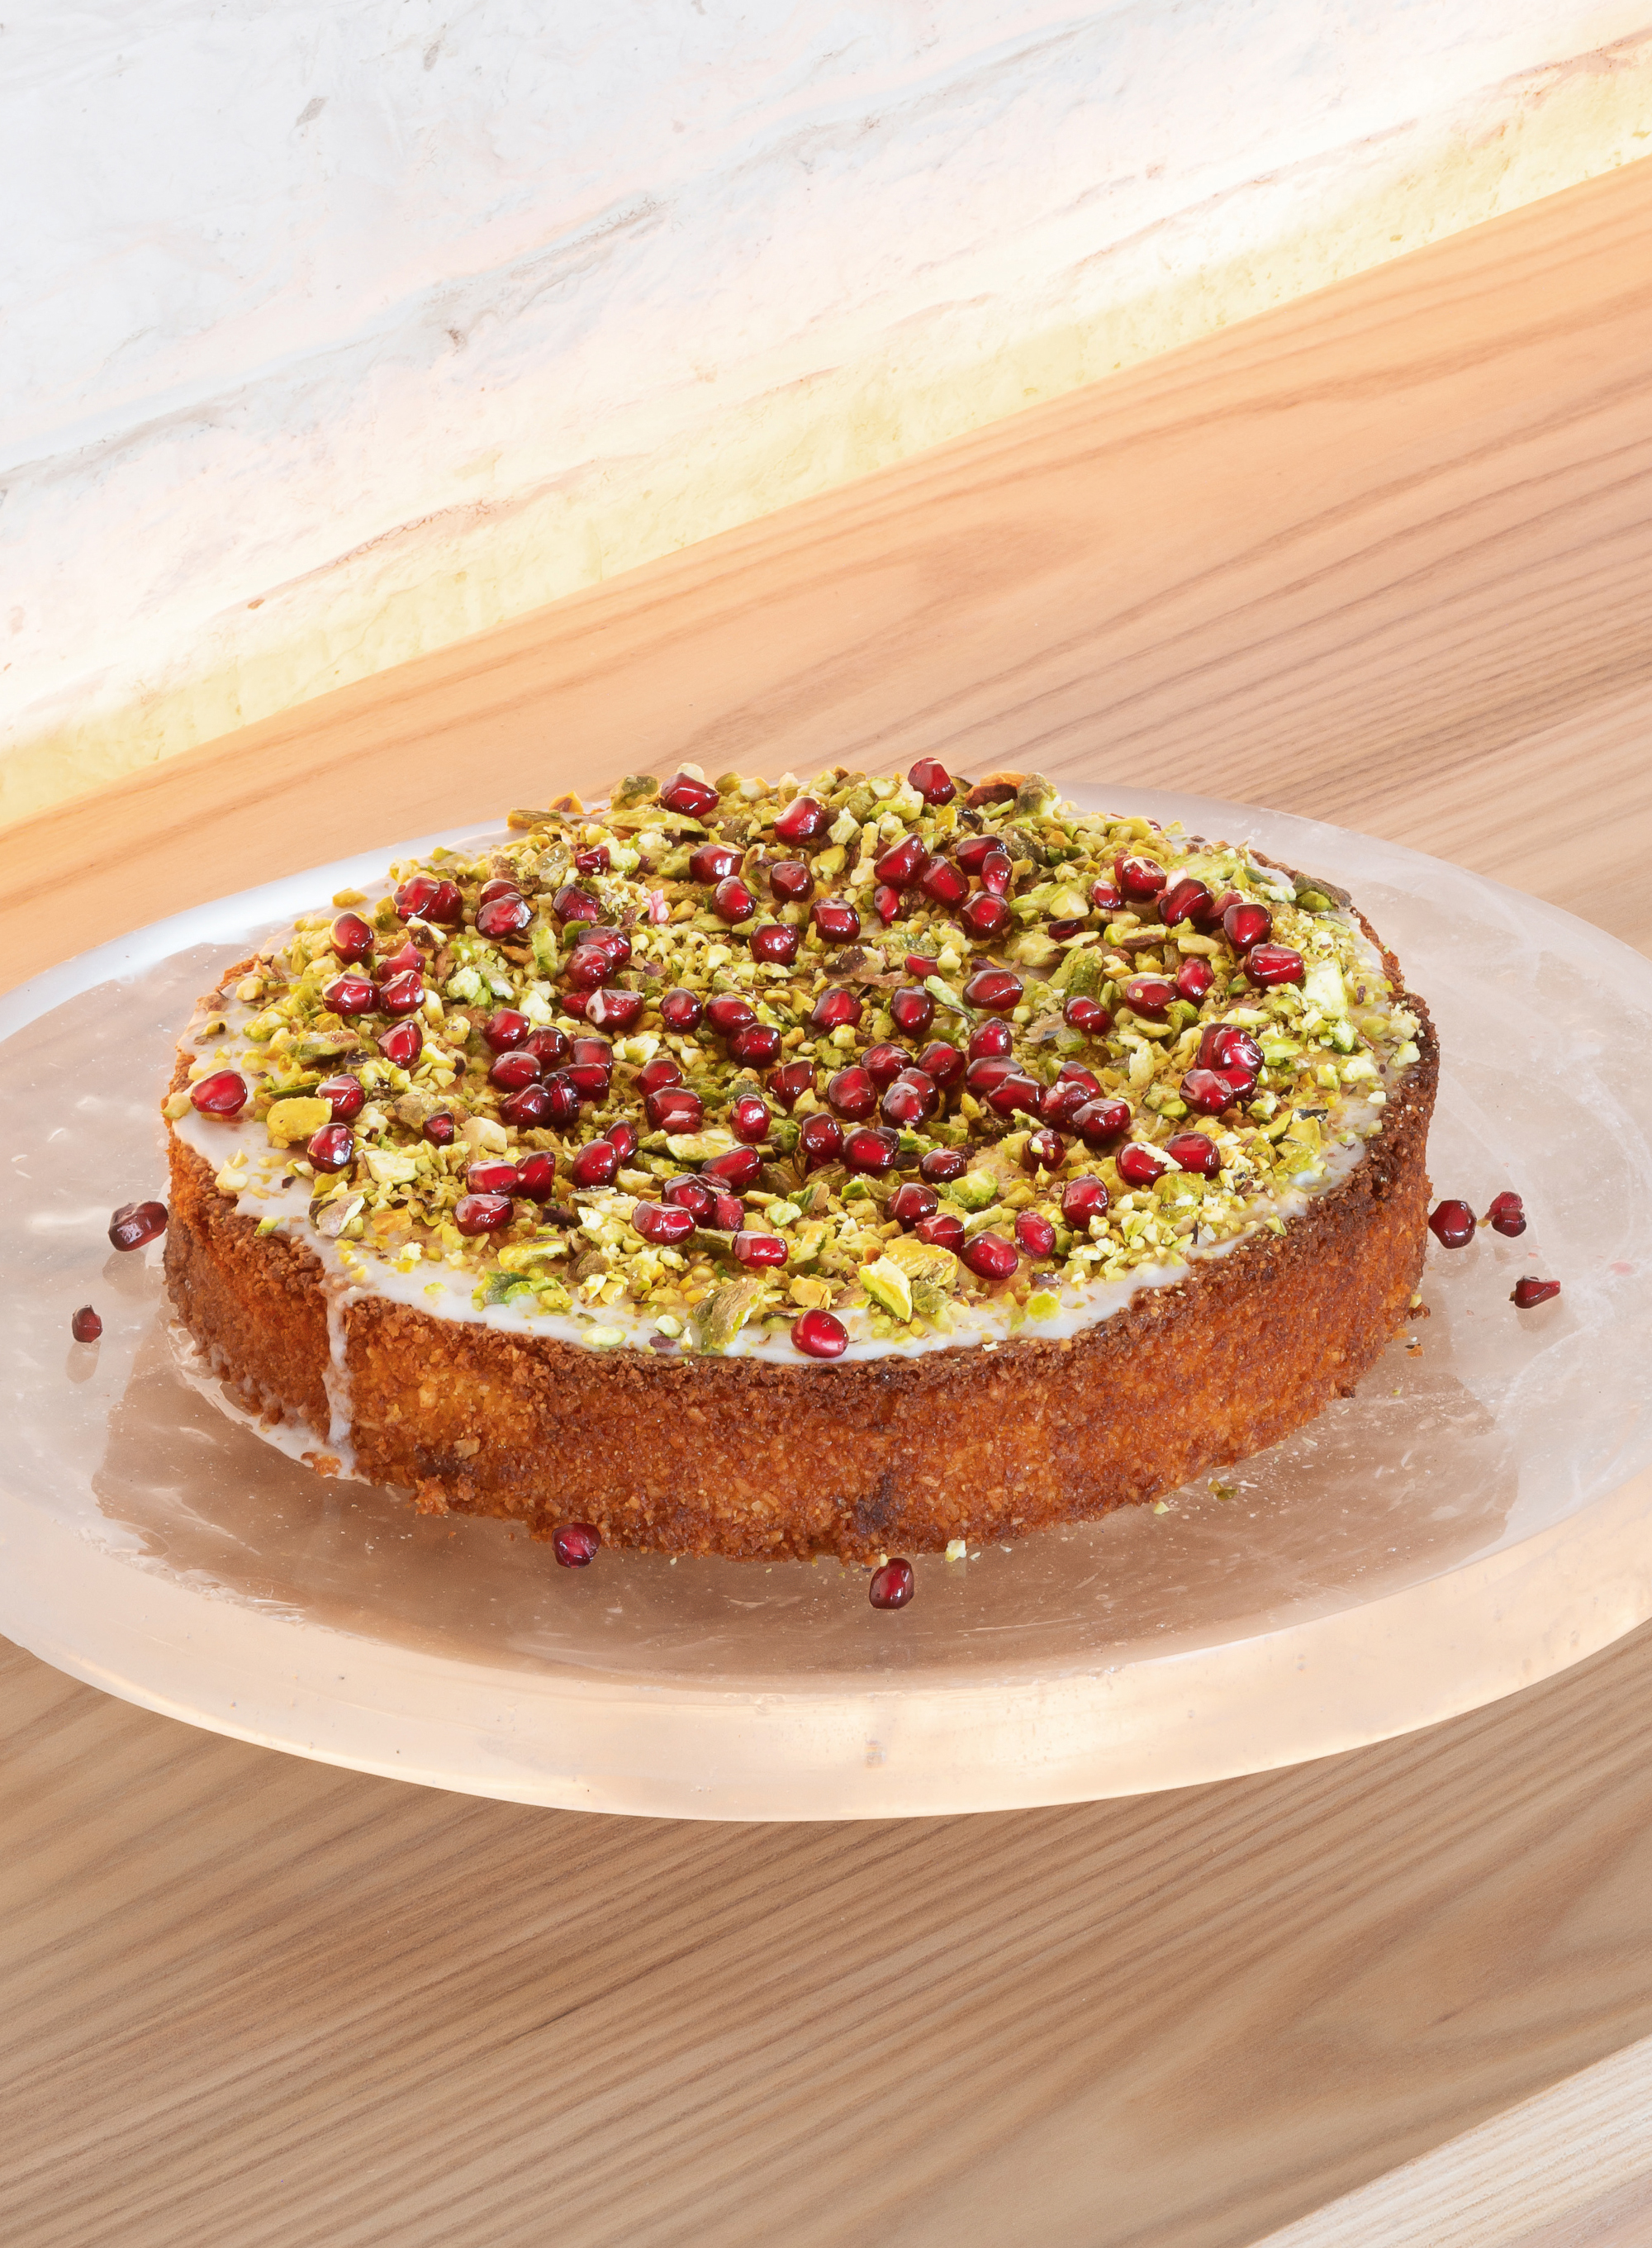 Lemon and almond cake with pomegranates and pistachios. Photograph by Gilbert McCarragher 